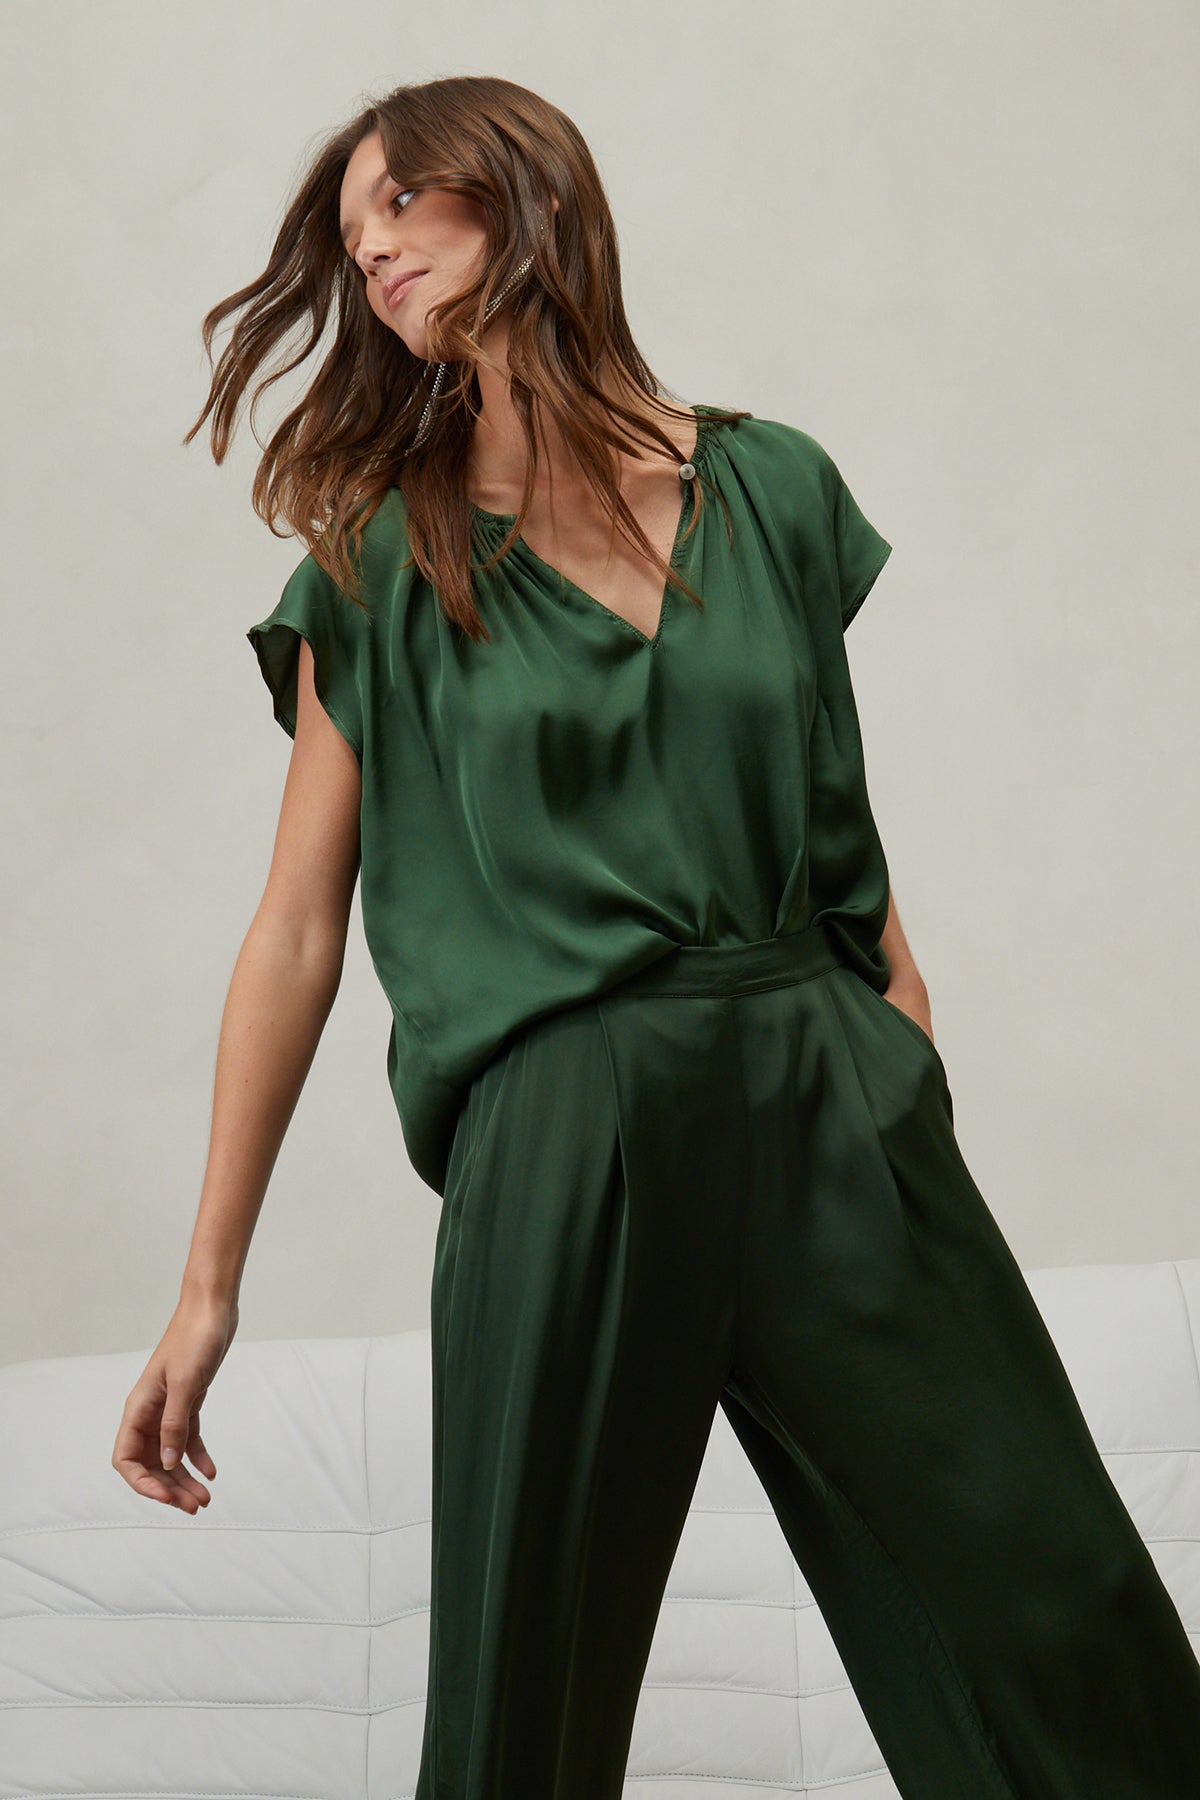 Odette Cap Sleeve Blouse in fern green with Livi pants front-25676824477889